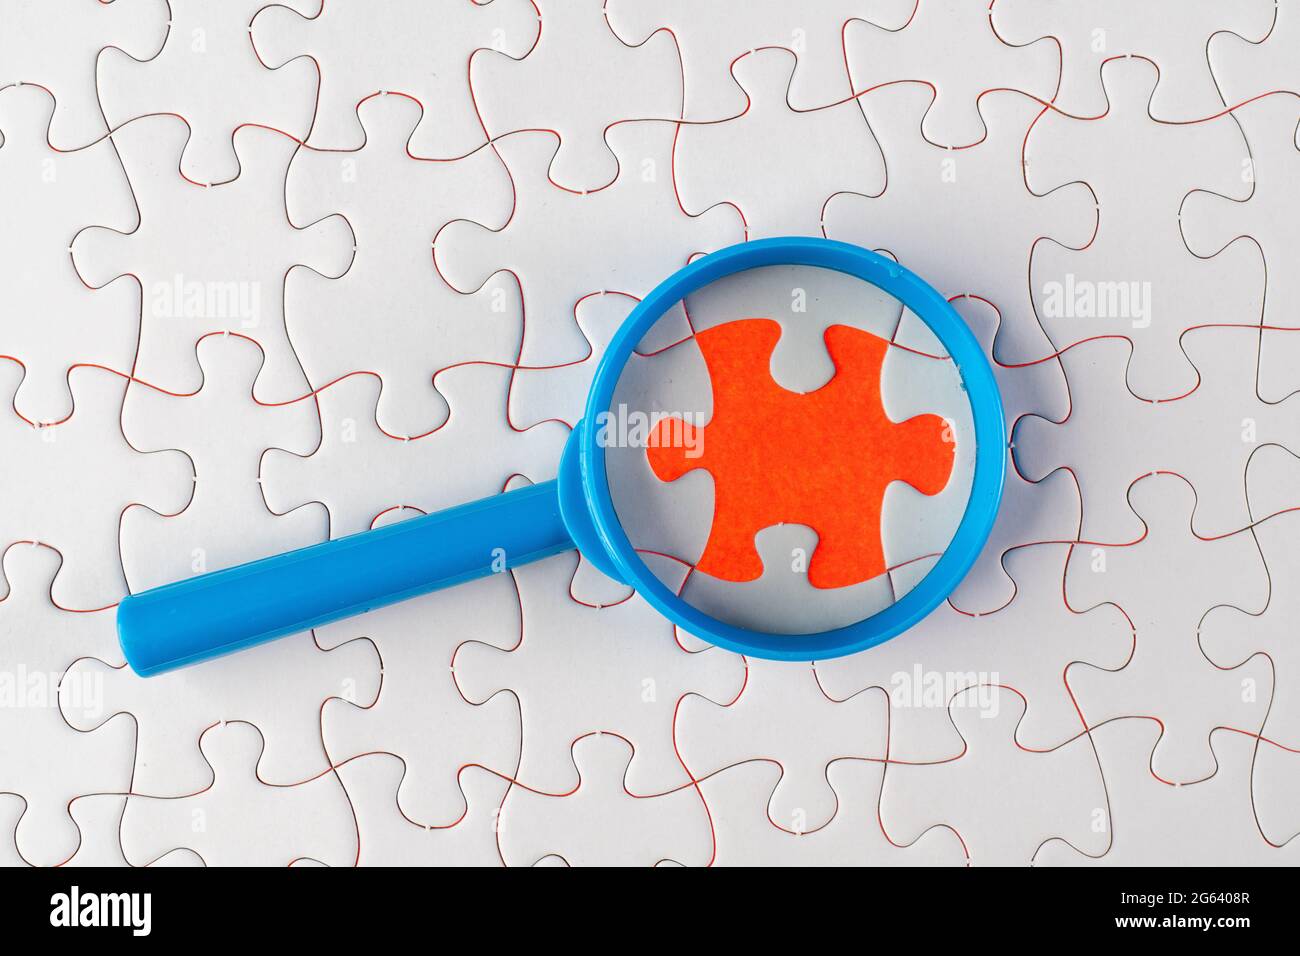 A magnifying glass on white jigsaw puzzle. Problem analysis and solving concept Stock Photo